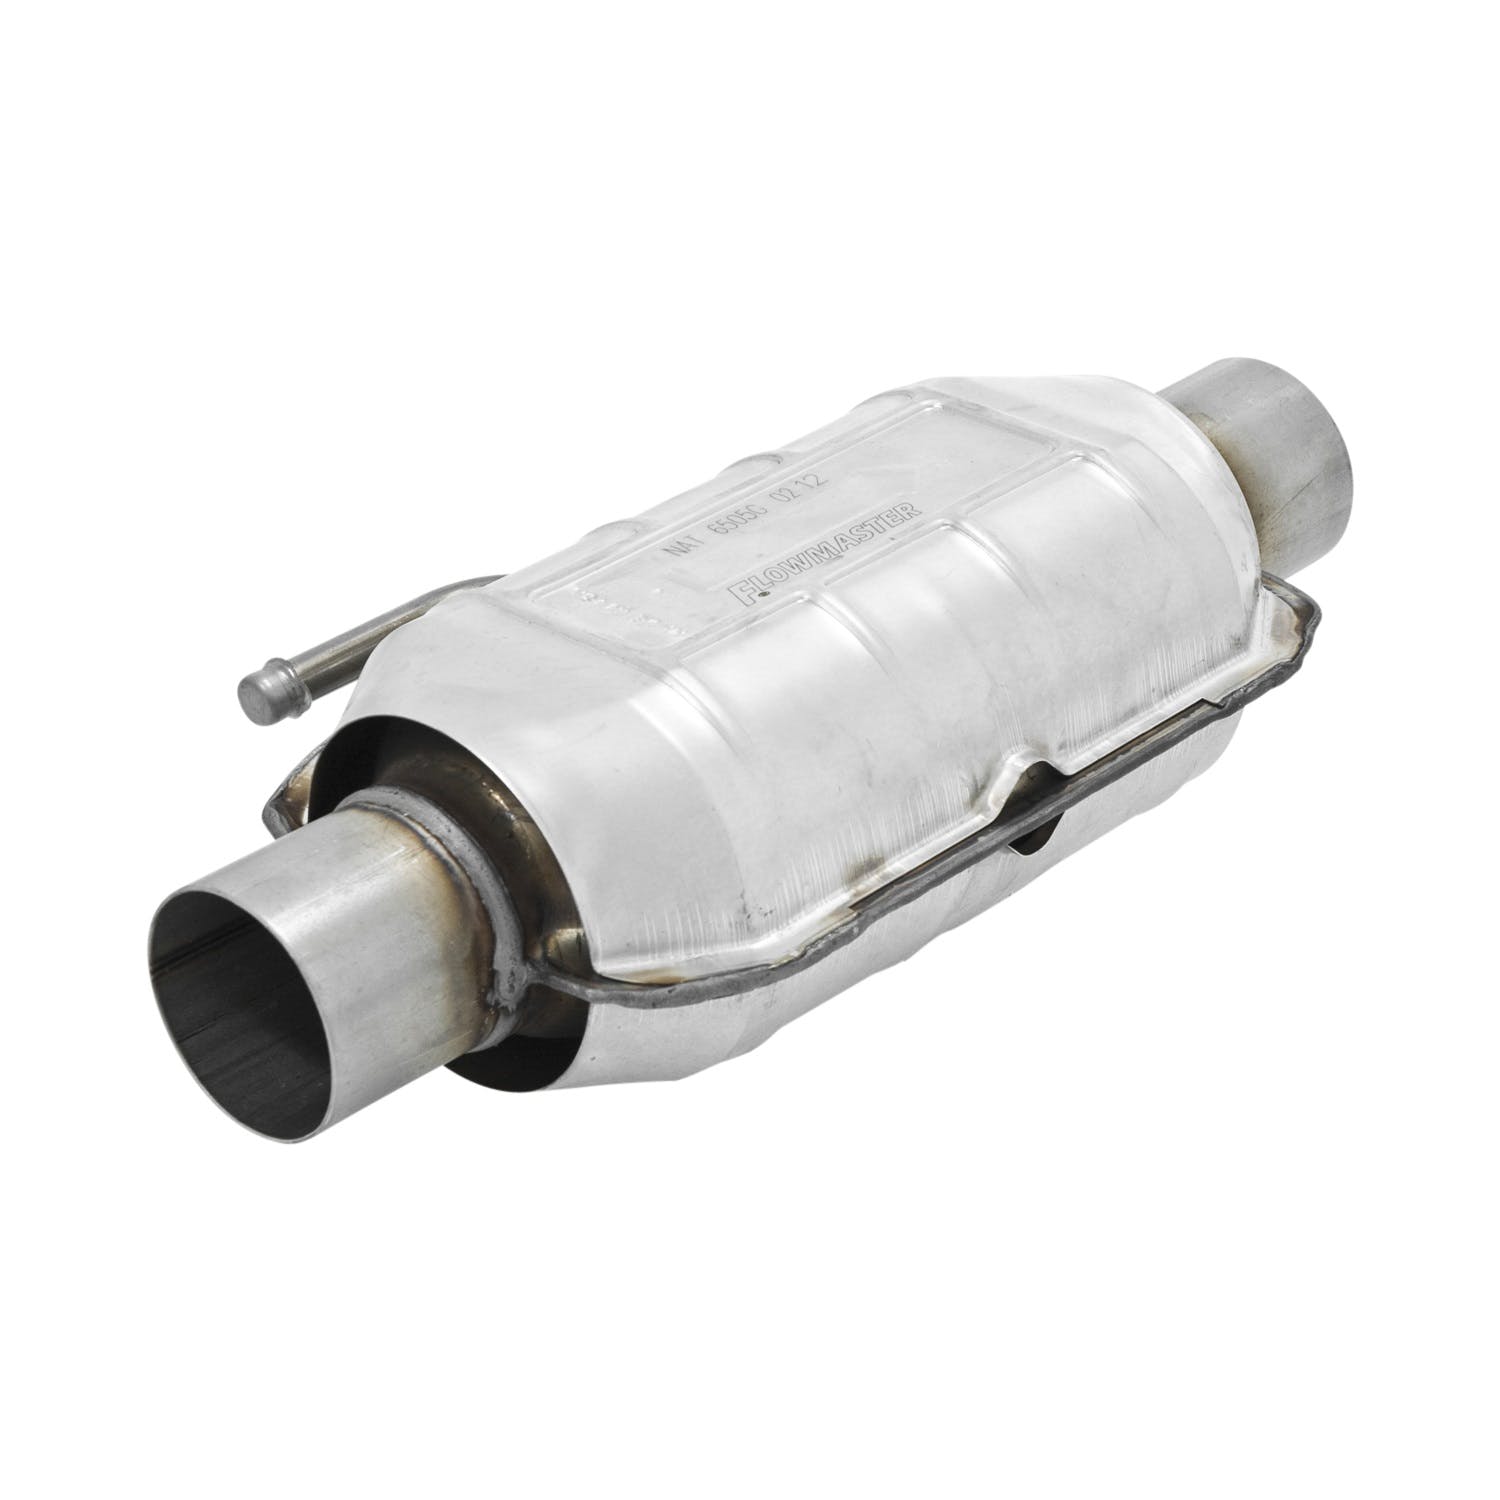 Flowmaster Catalytic Converters 2200125 Catalytic Converter-Universal-220 Series-2.50 in. Inlet/Outlet-49 State